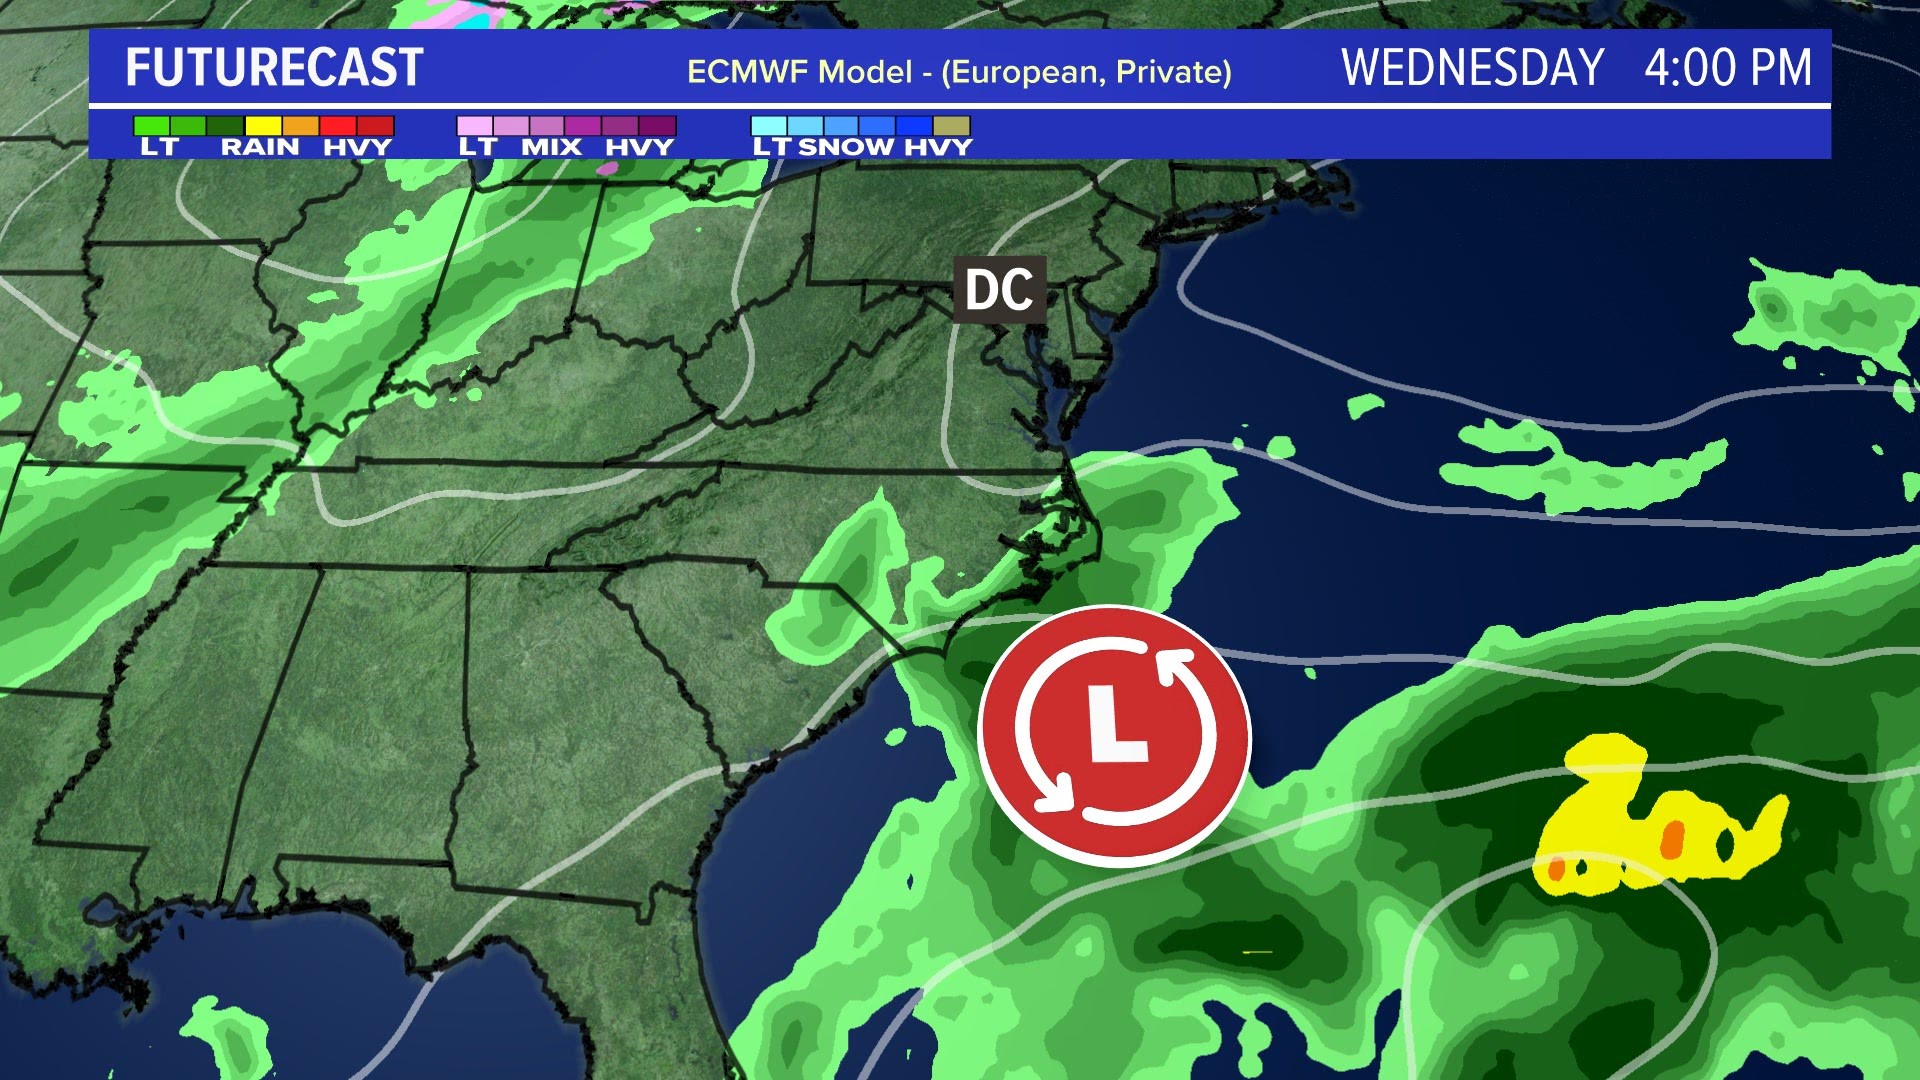 An area of low pressure moves up the coast, strengthening as it does so. It will bring rain to DC, then high winds, rain and snow in the northeast and New England.